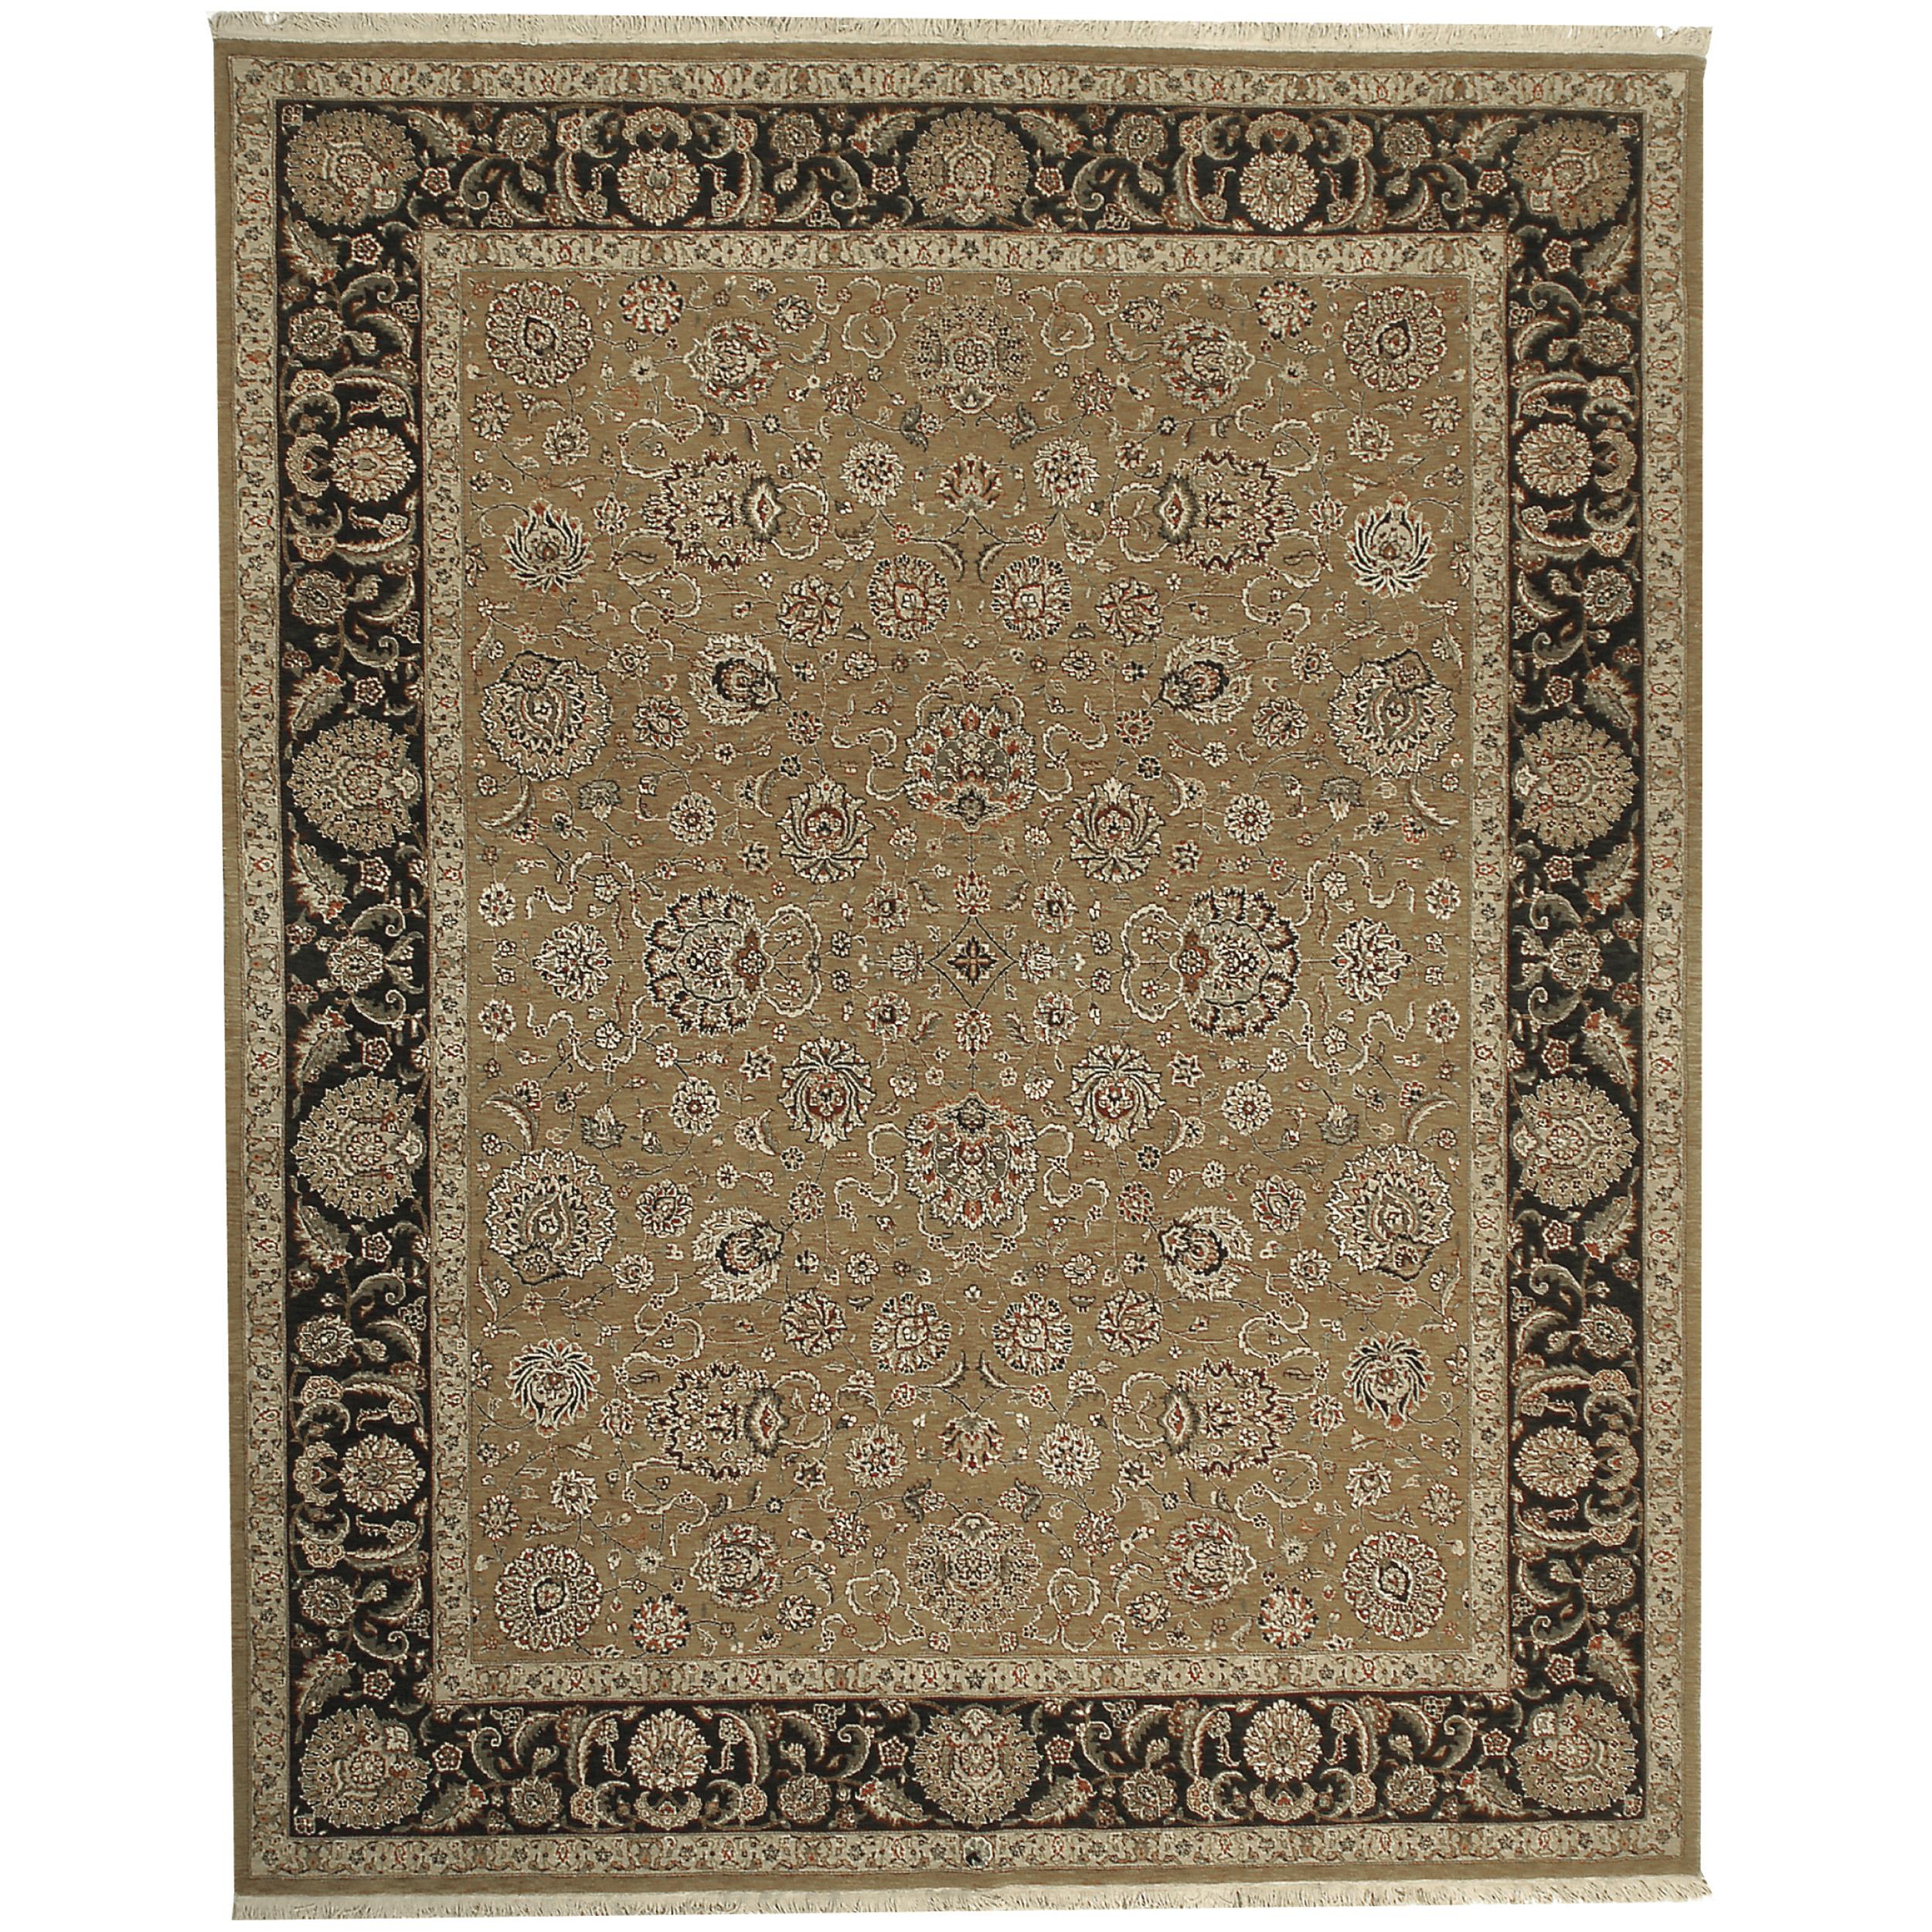 Luxury Traditional Hand-Knotted Kashan Gold & Black 12x15 Rug